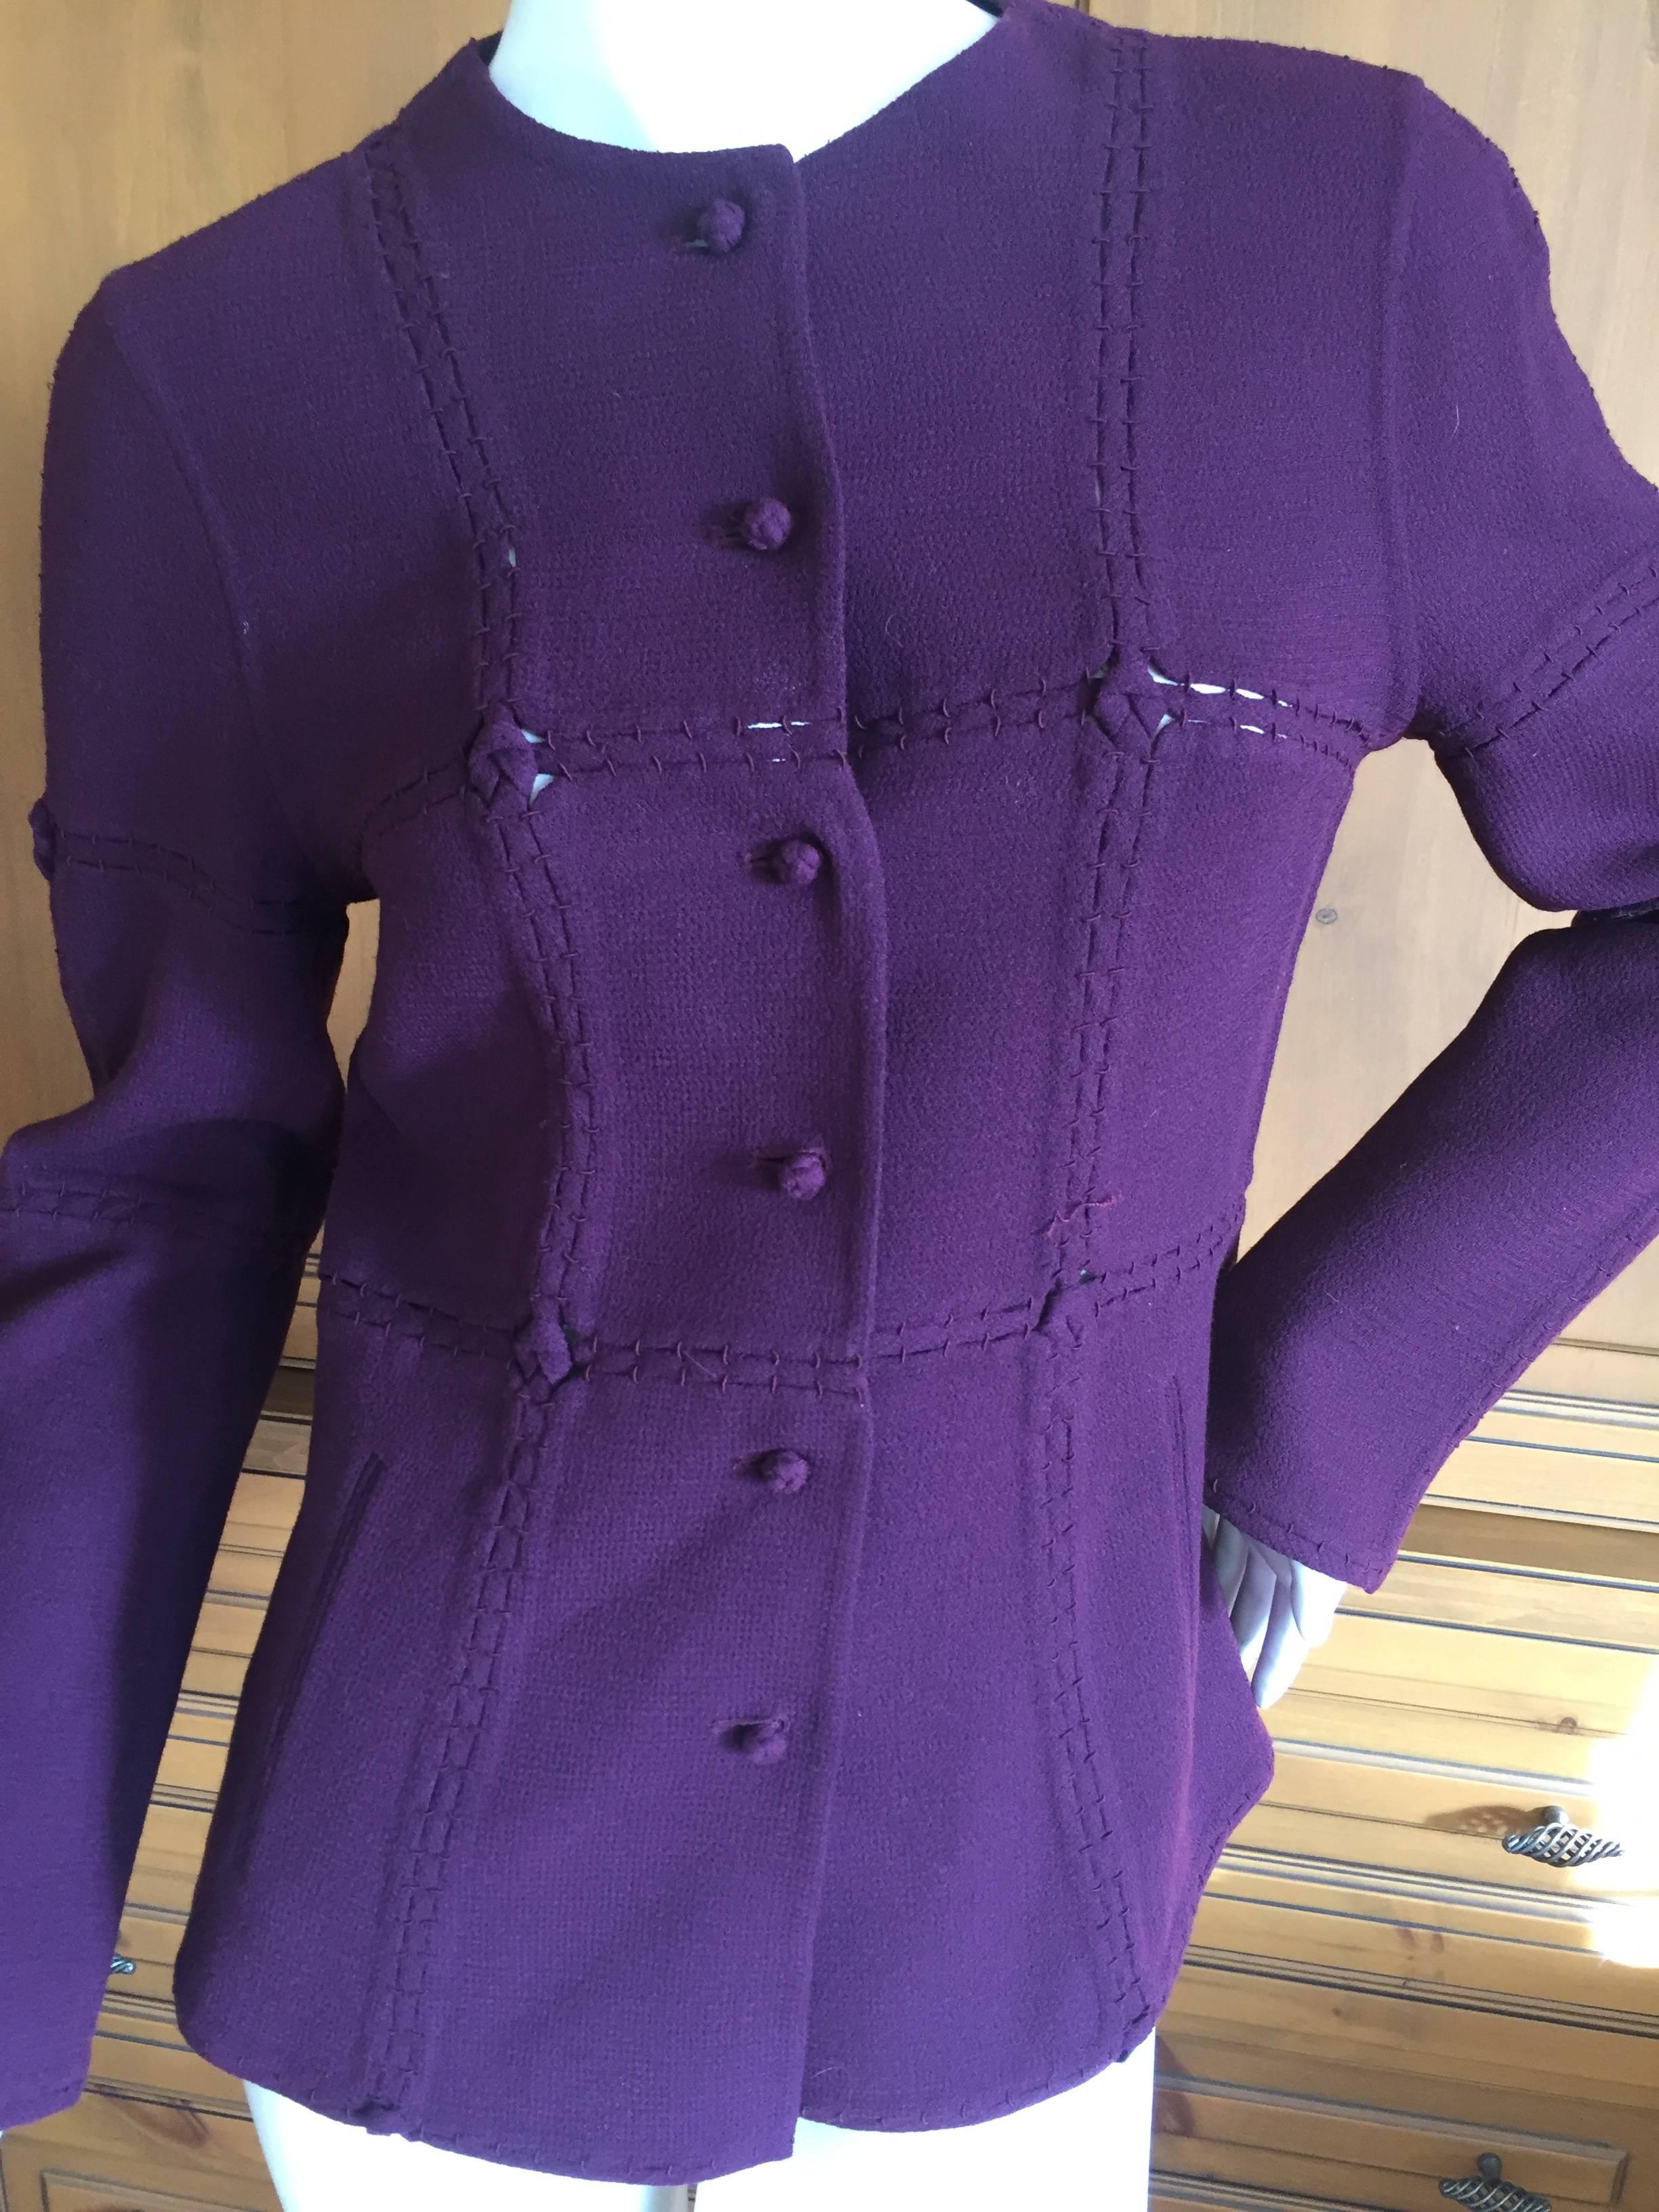 Chado Ralph Rucci Purple Jacket with Open Stitch Details  
Black Label Rucci 
This is a work of art, sublime.
The details on this are so cool. Photos don't really capture the details.
Size 6
Bust 34